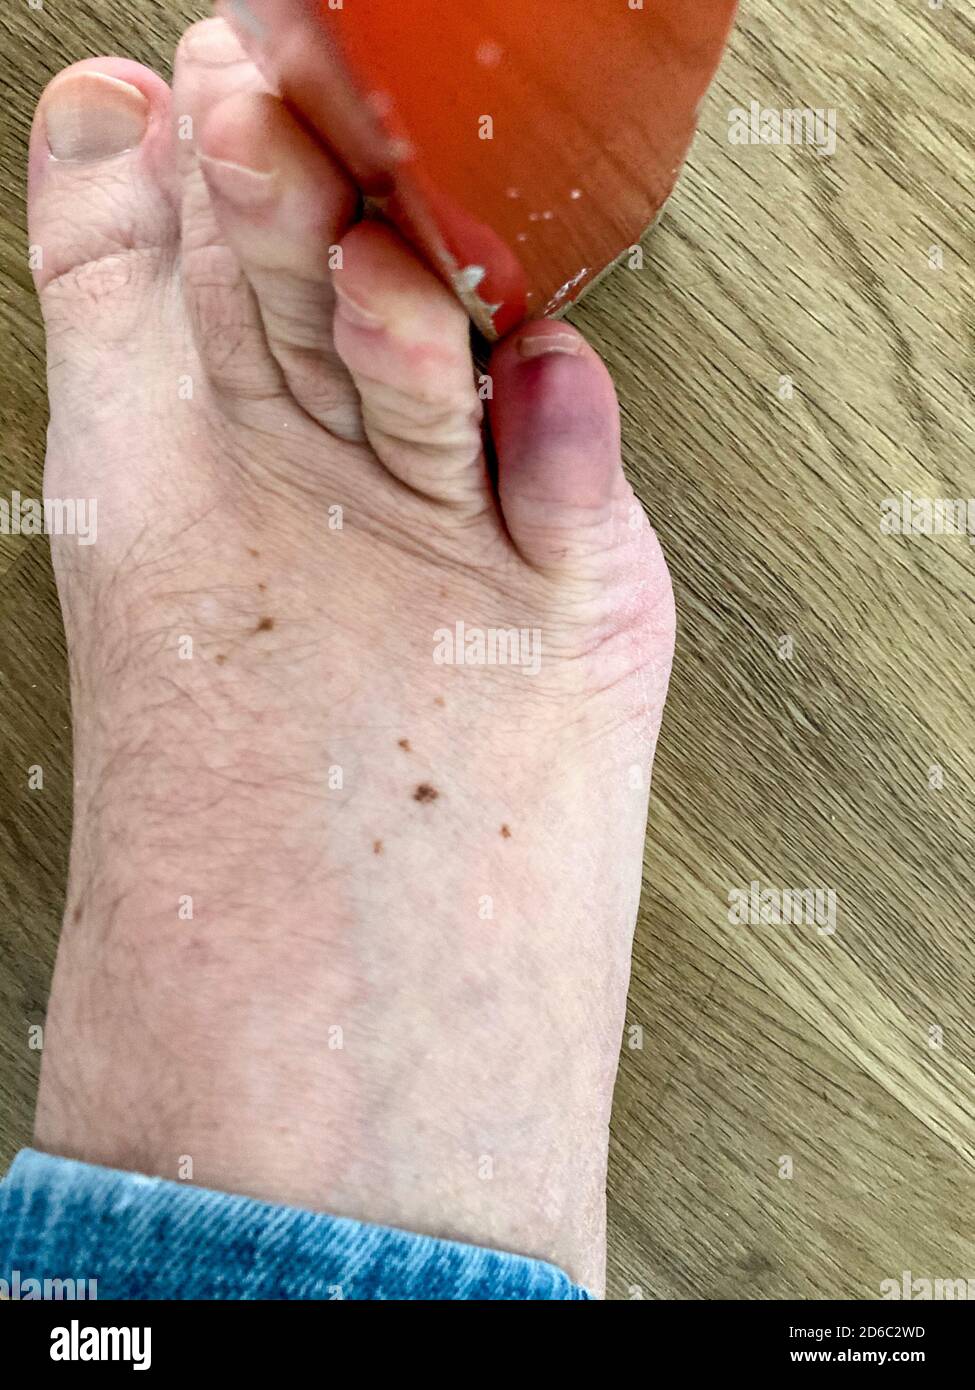 Blunt force trauma to the foot of a senior man resulting in a broken or fractured little toe and discoloration of the tissue viewed from above Stock Photo